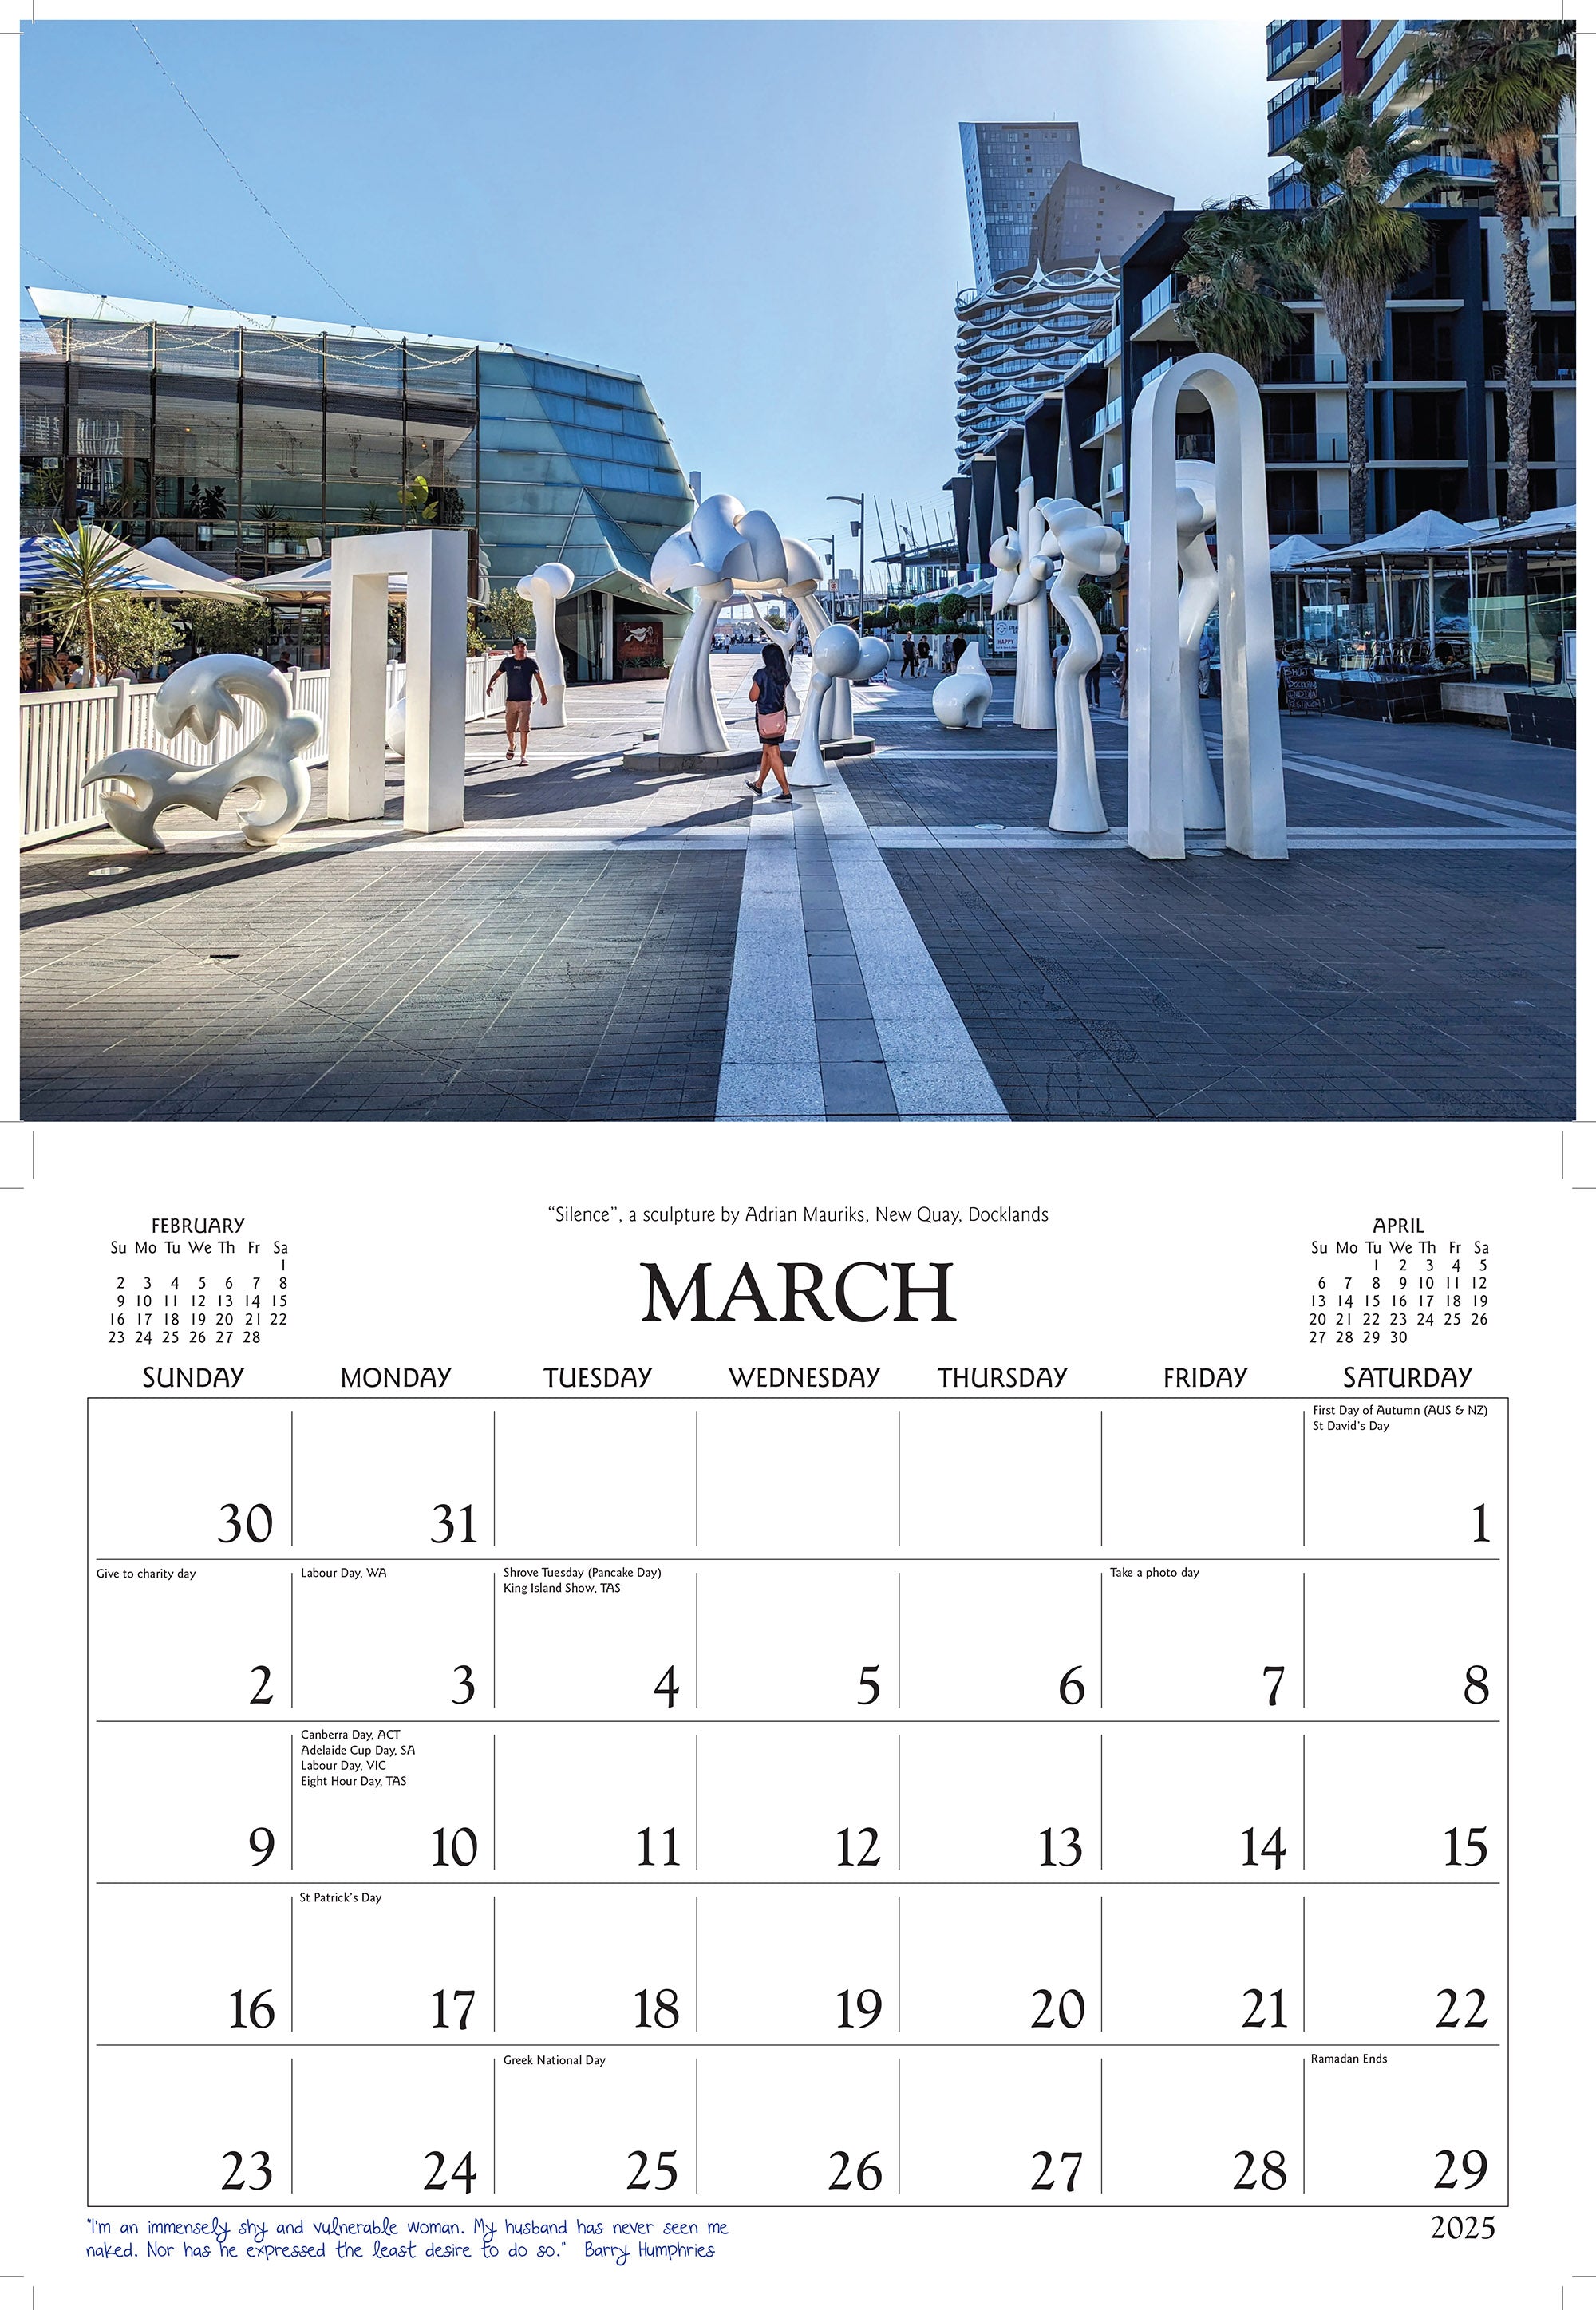 2025 Scenic Melbourne By David Messent - Horizontal Wall Calendar